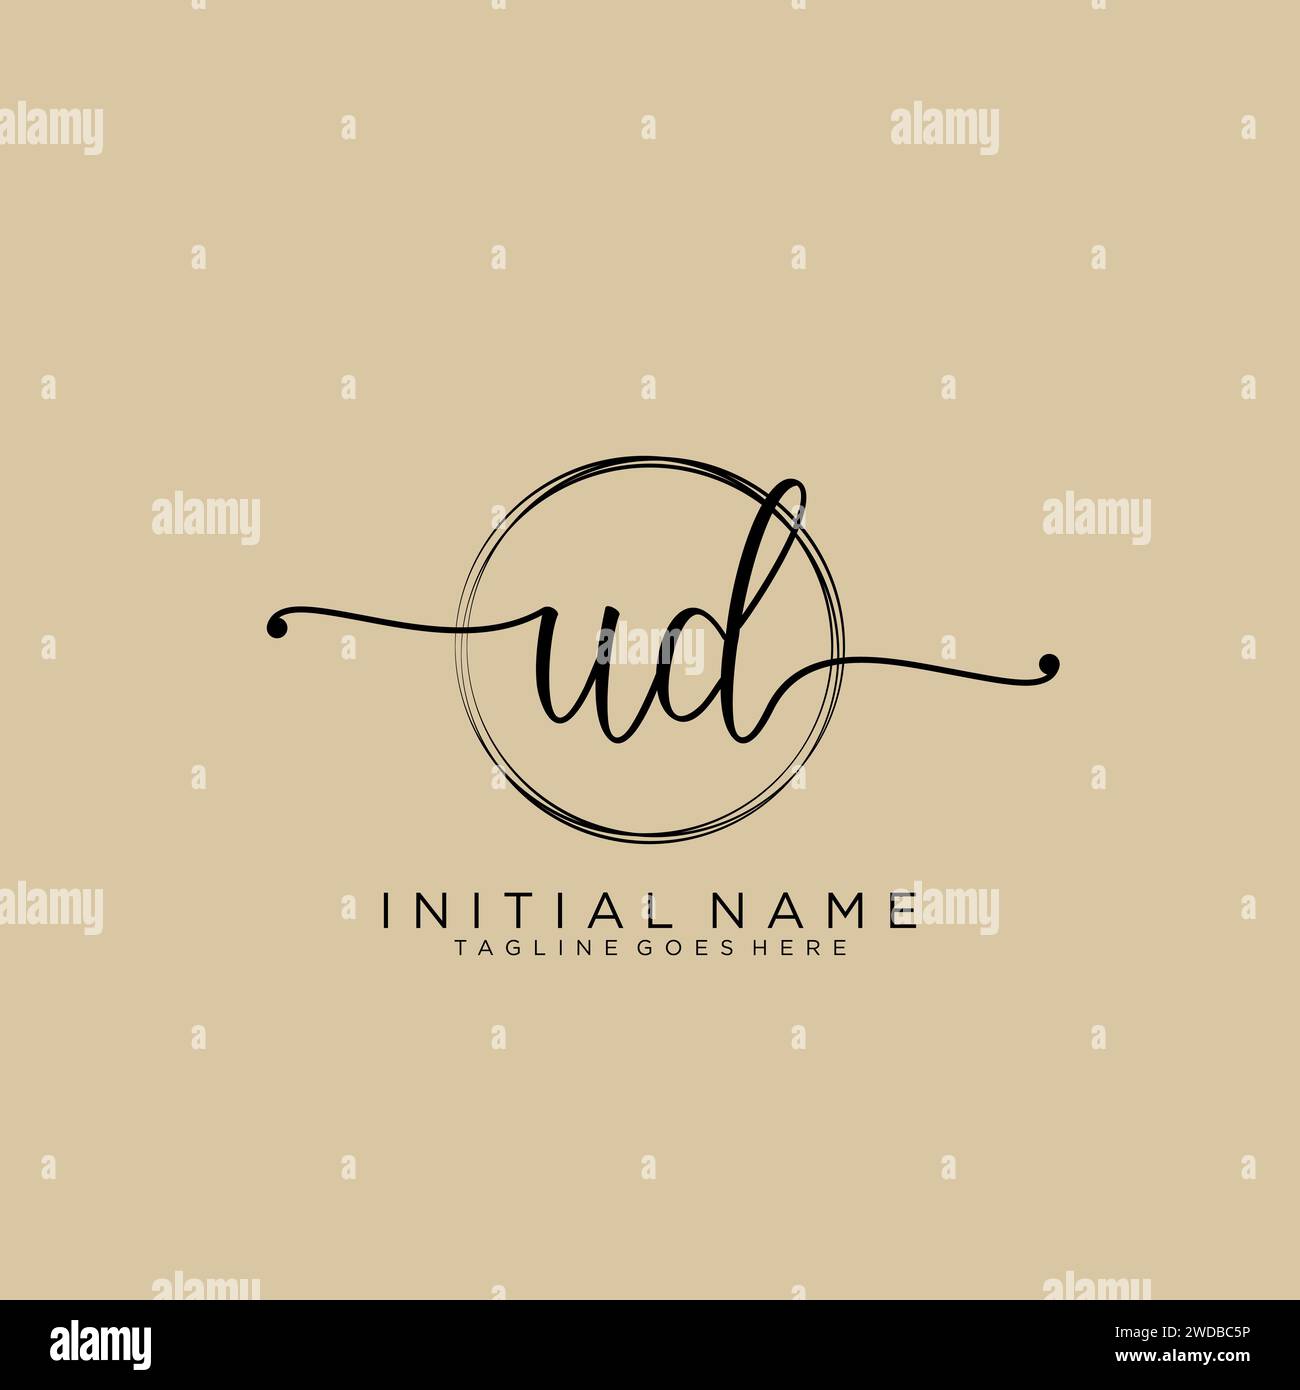 UD Initial handwriting logo with circle Stock Vector